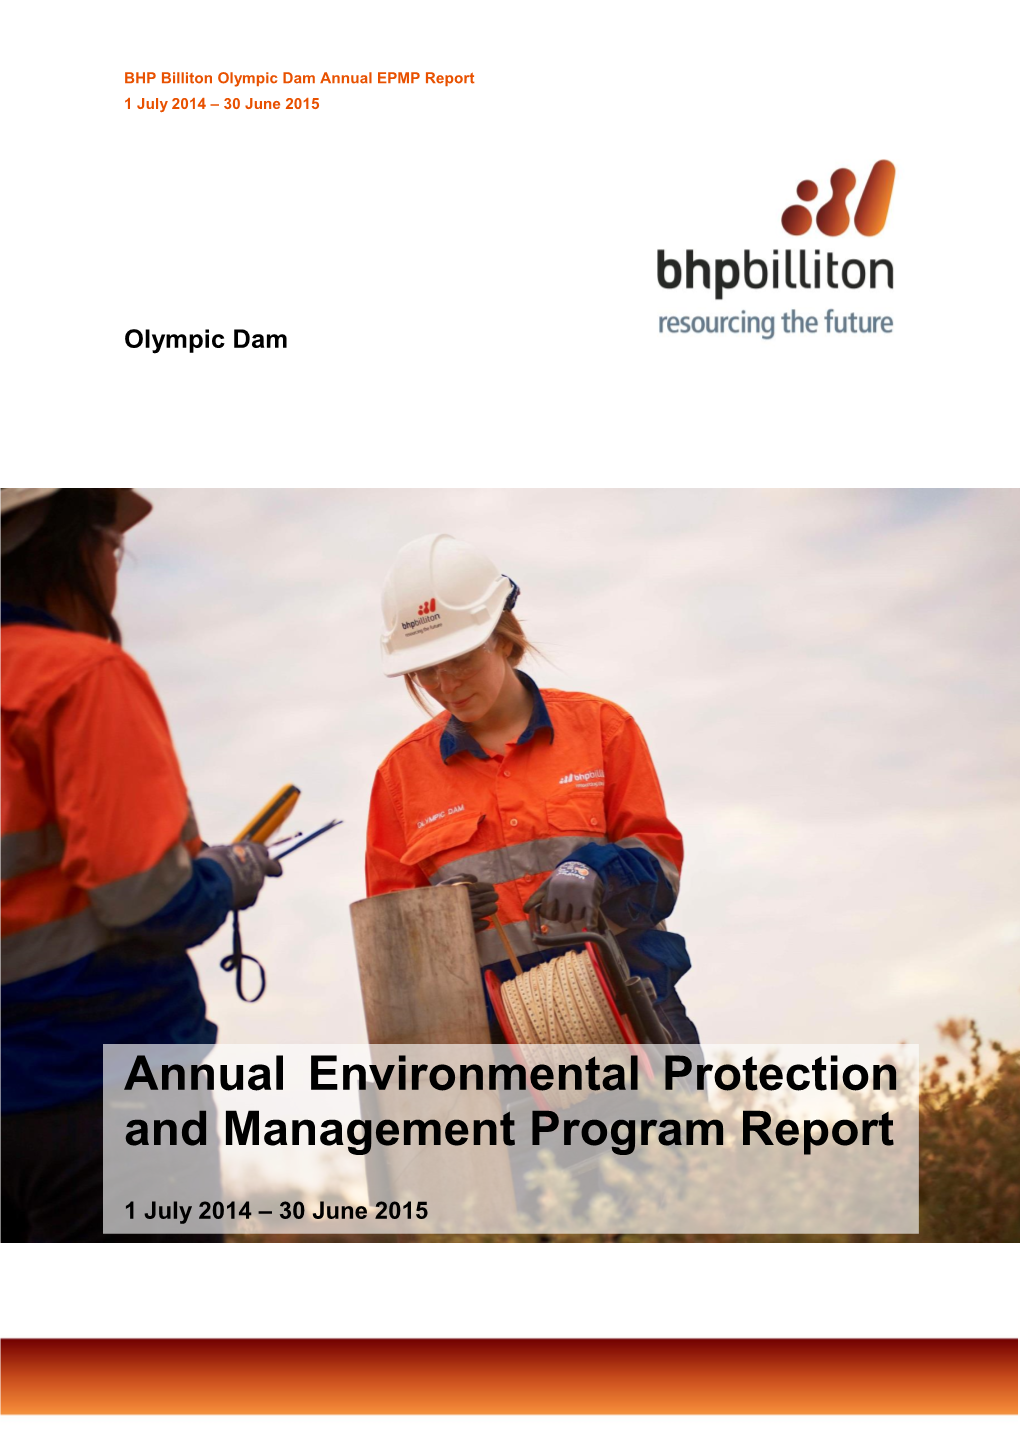 Annual Environmental Protection and Management Program Report